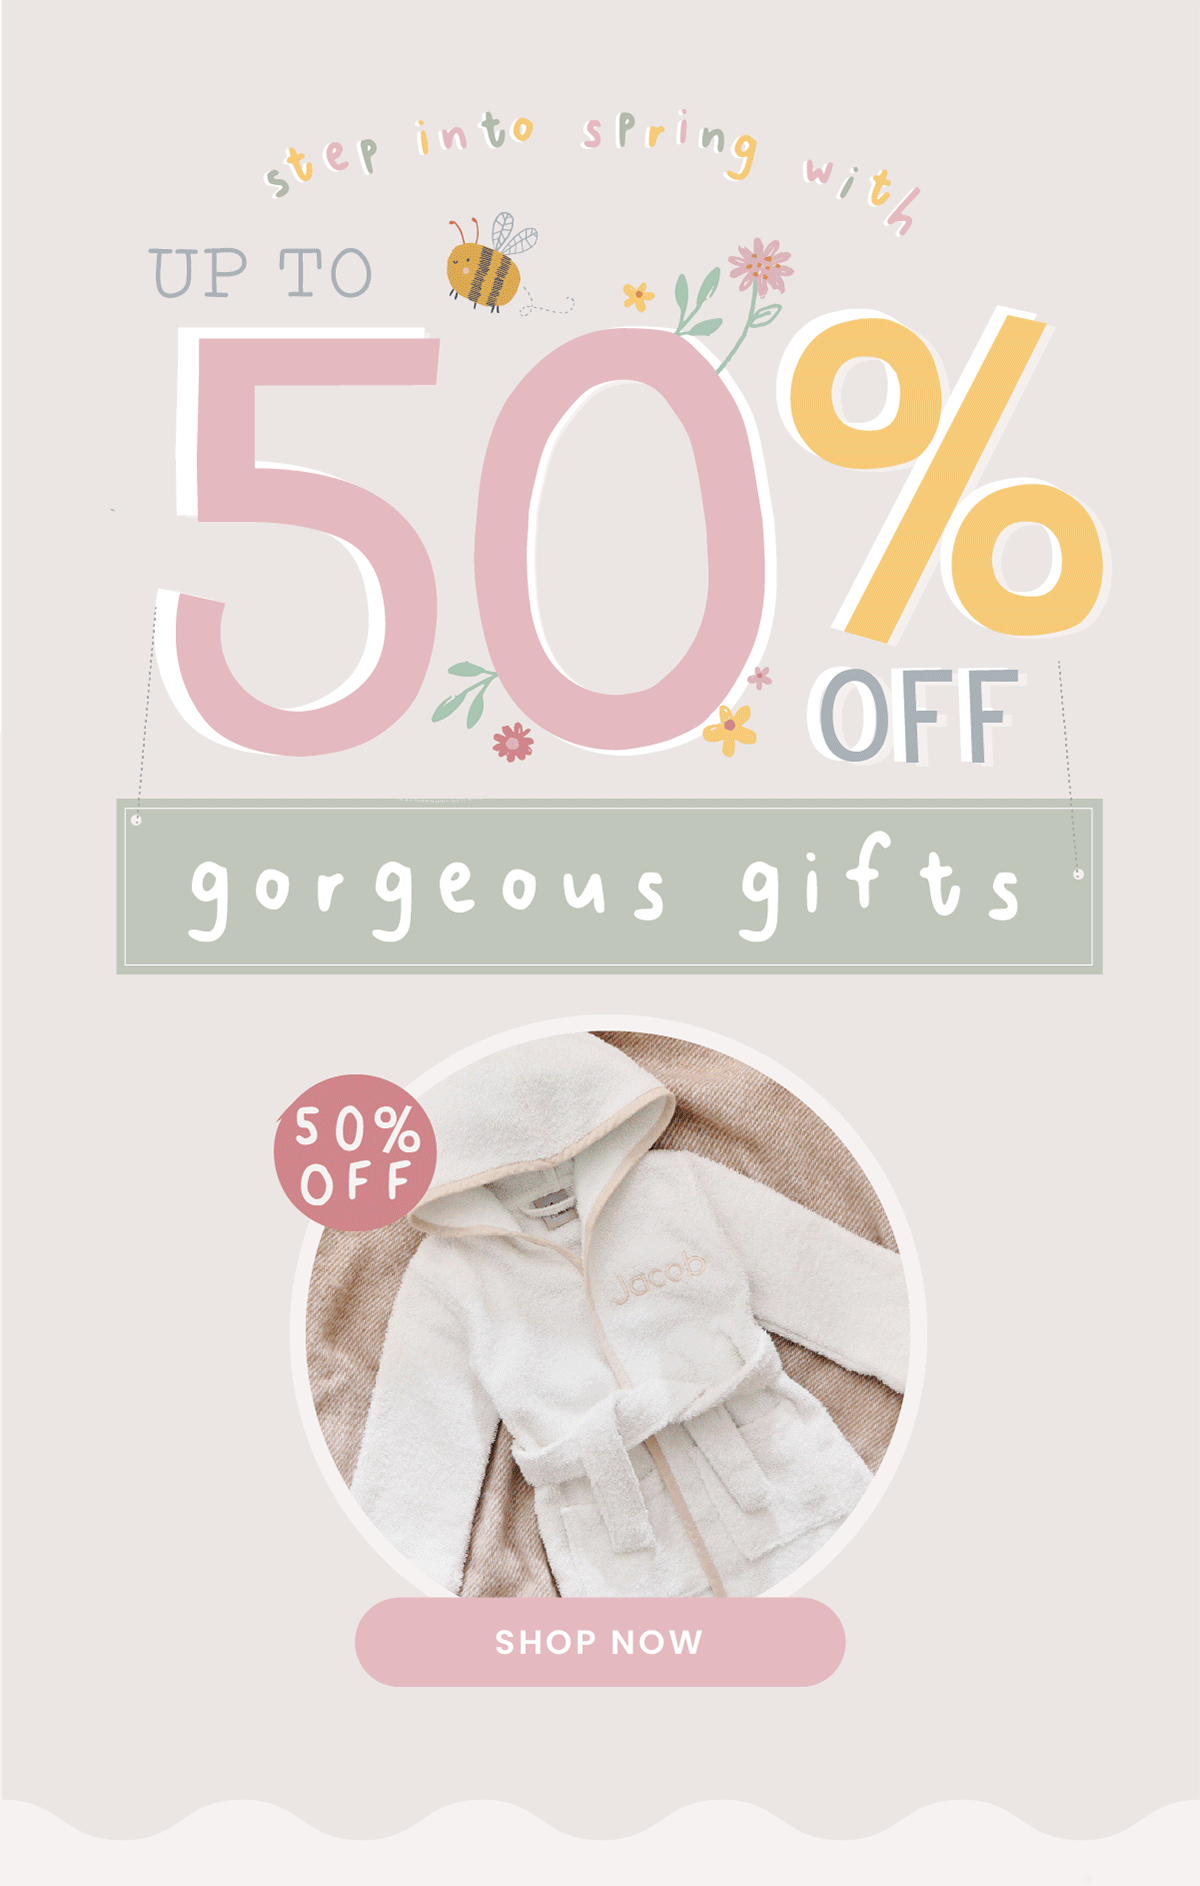 Up to 50% Off Gorgeous Gifts